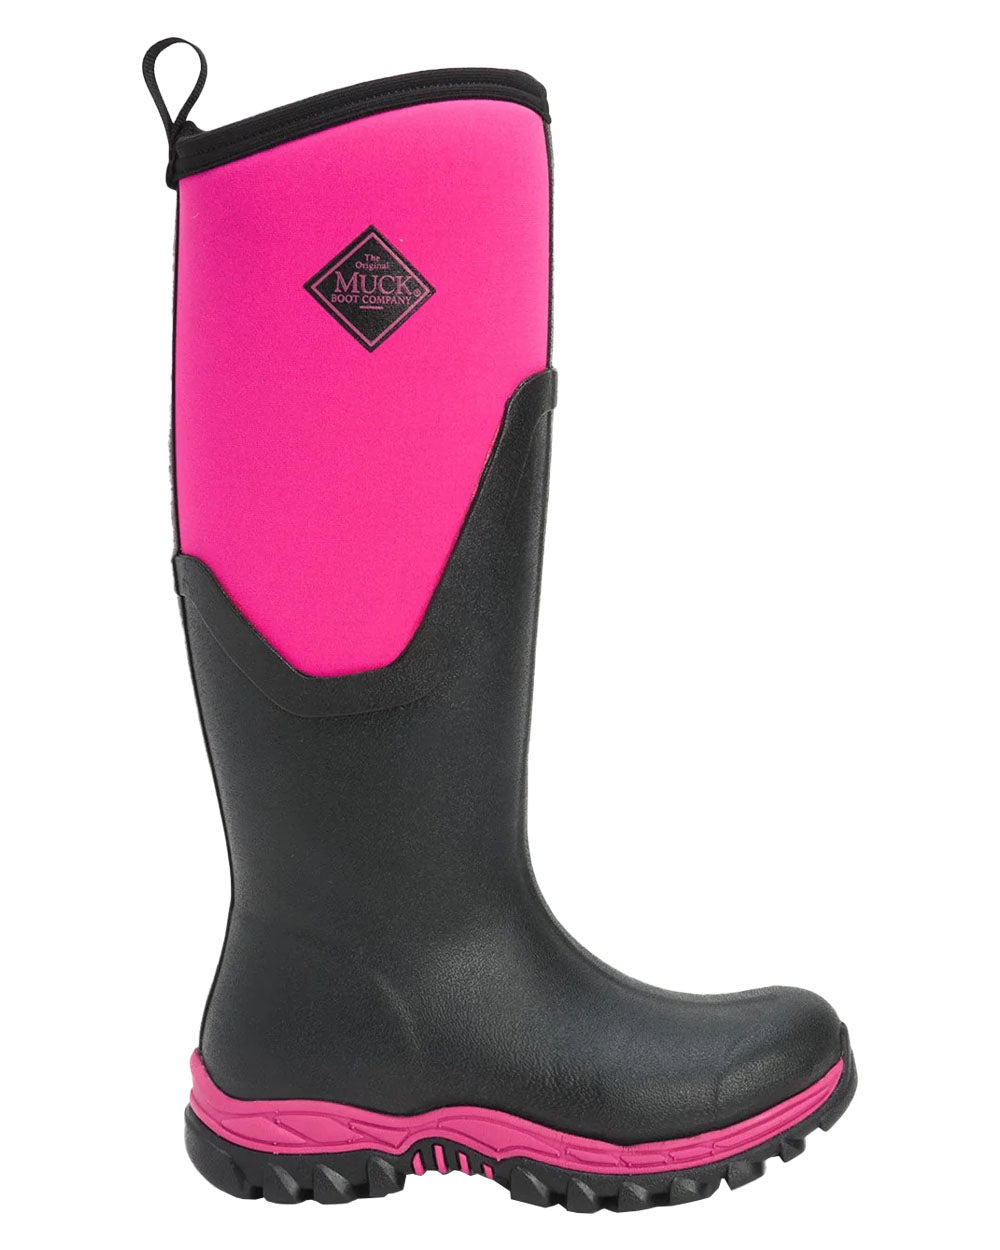 Hot Pink coloured Muck Boots Womens Artic Sport II Tall Wellingtons on White background 